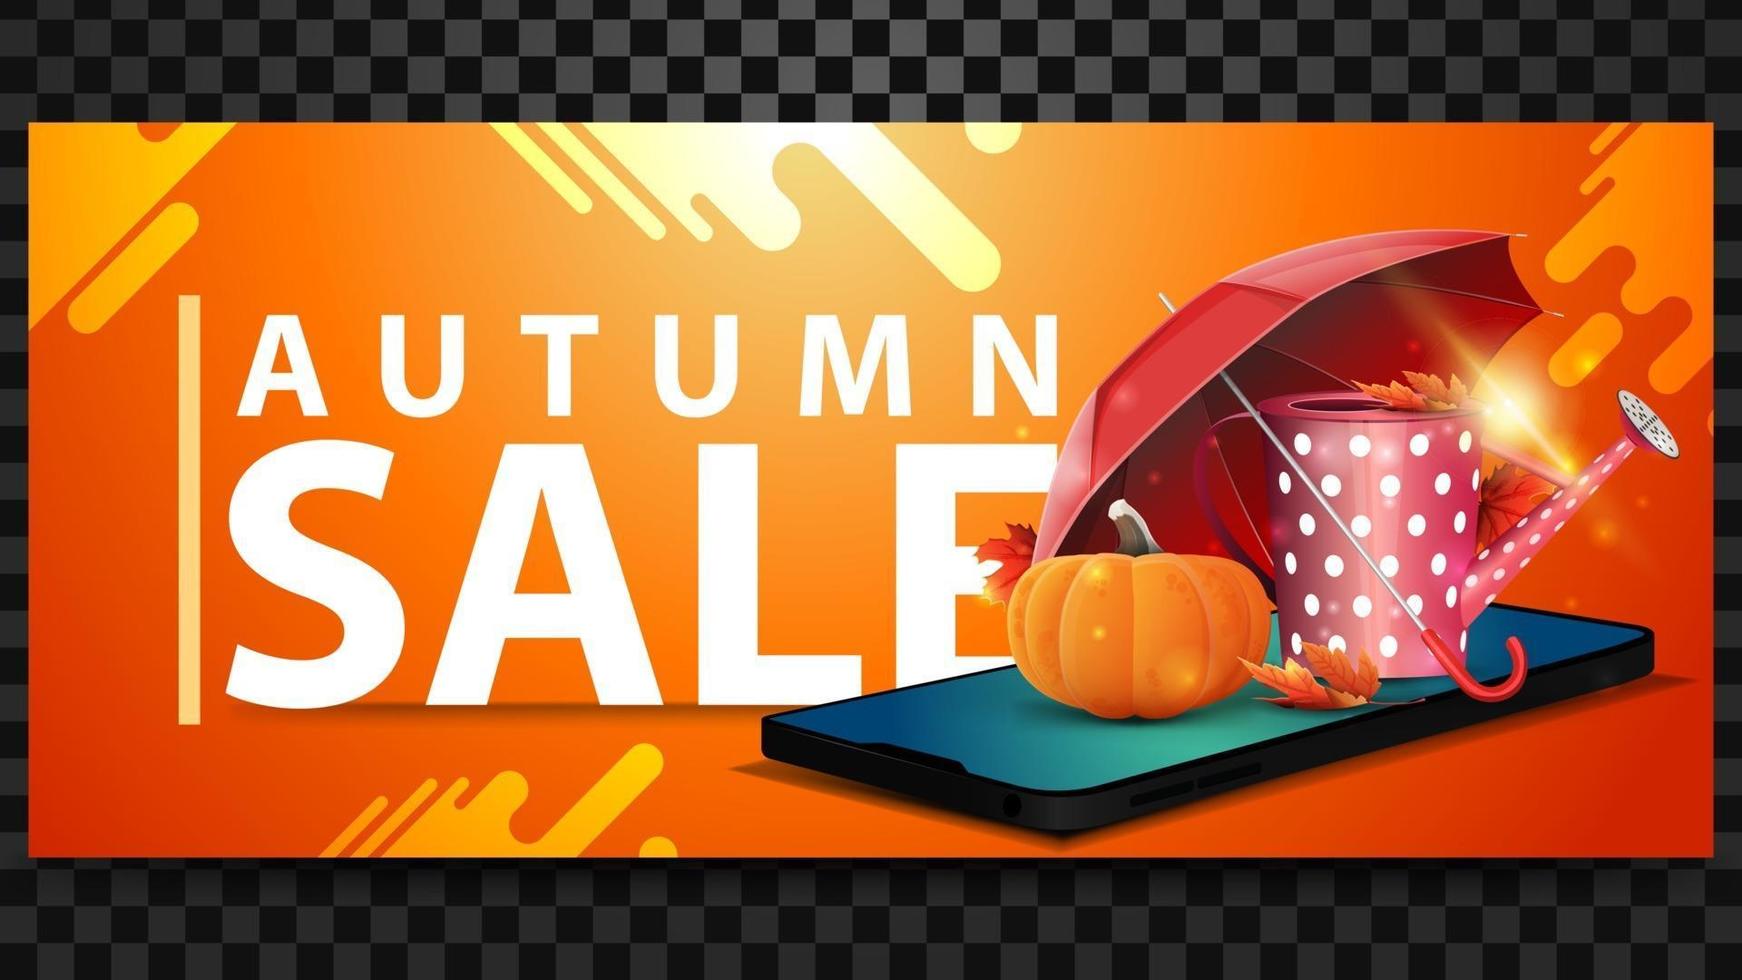 Autumn sale, discount banner with a smartphone, garden watering can vector